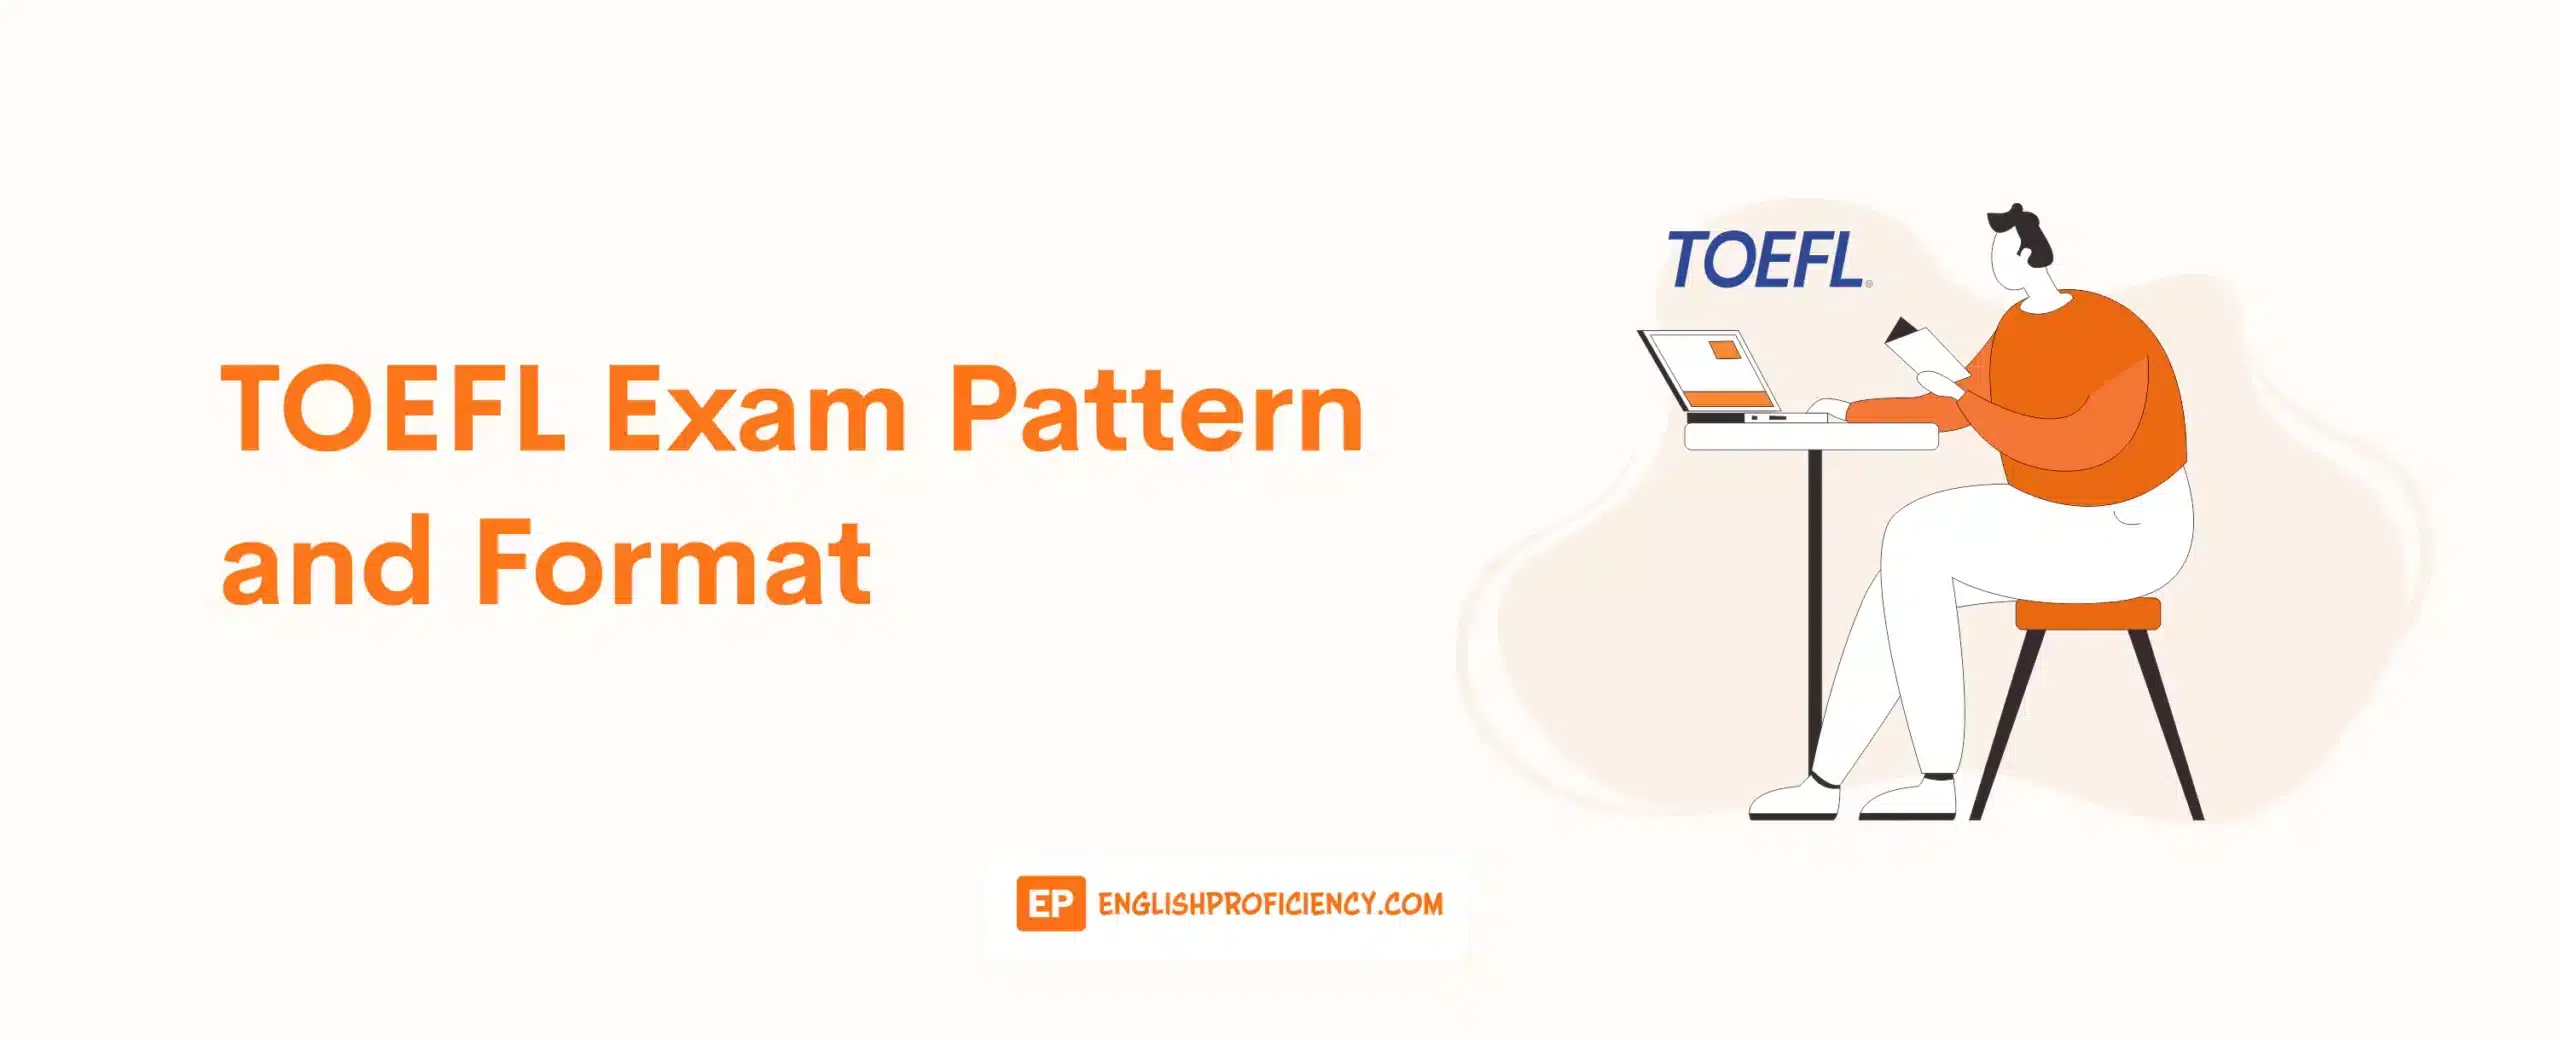 TOEFL Exam Pattern and Format